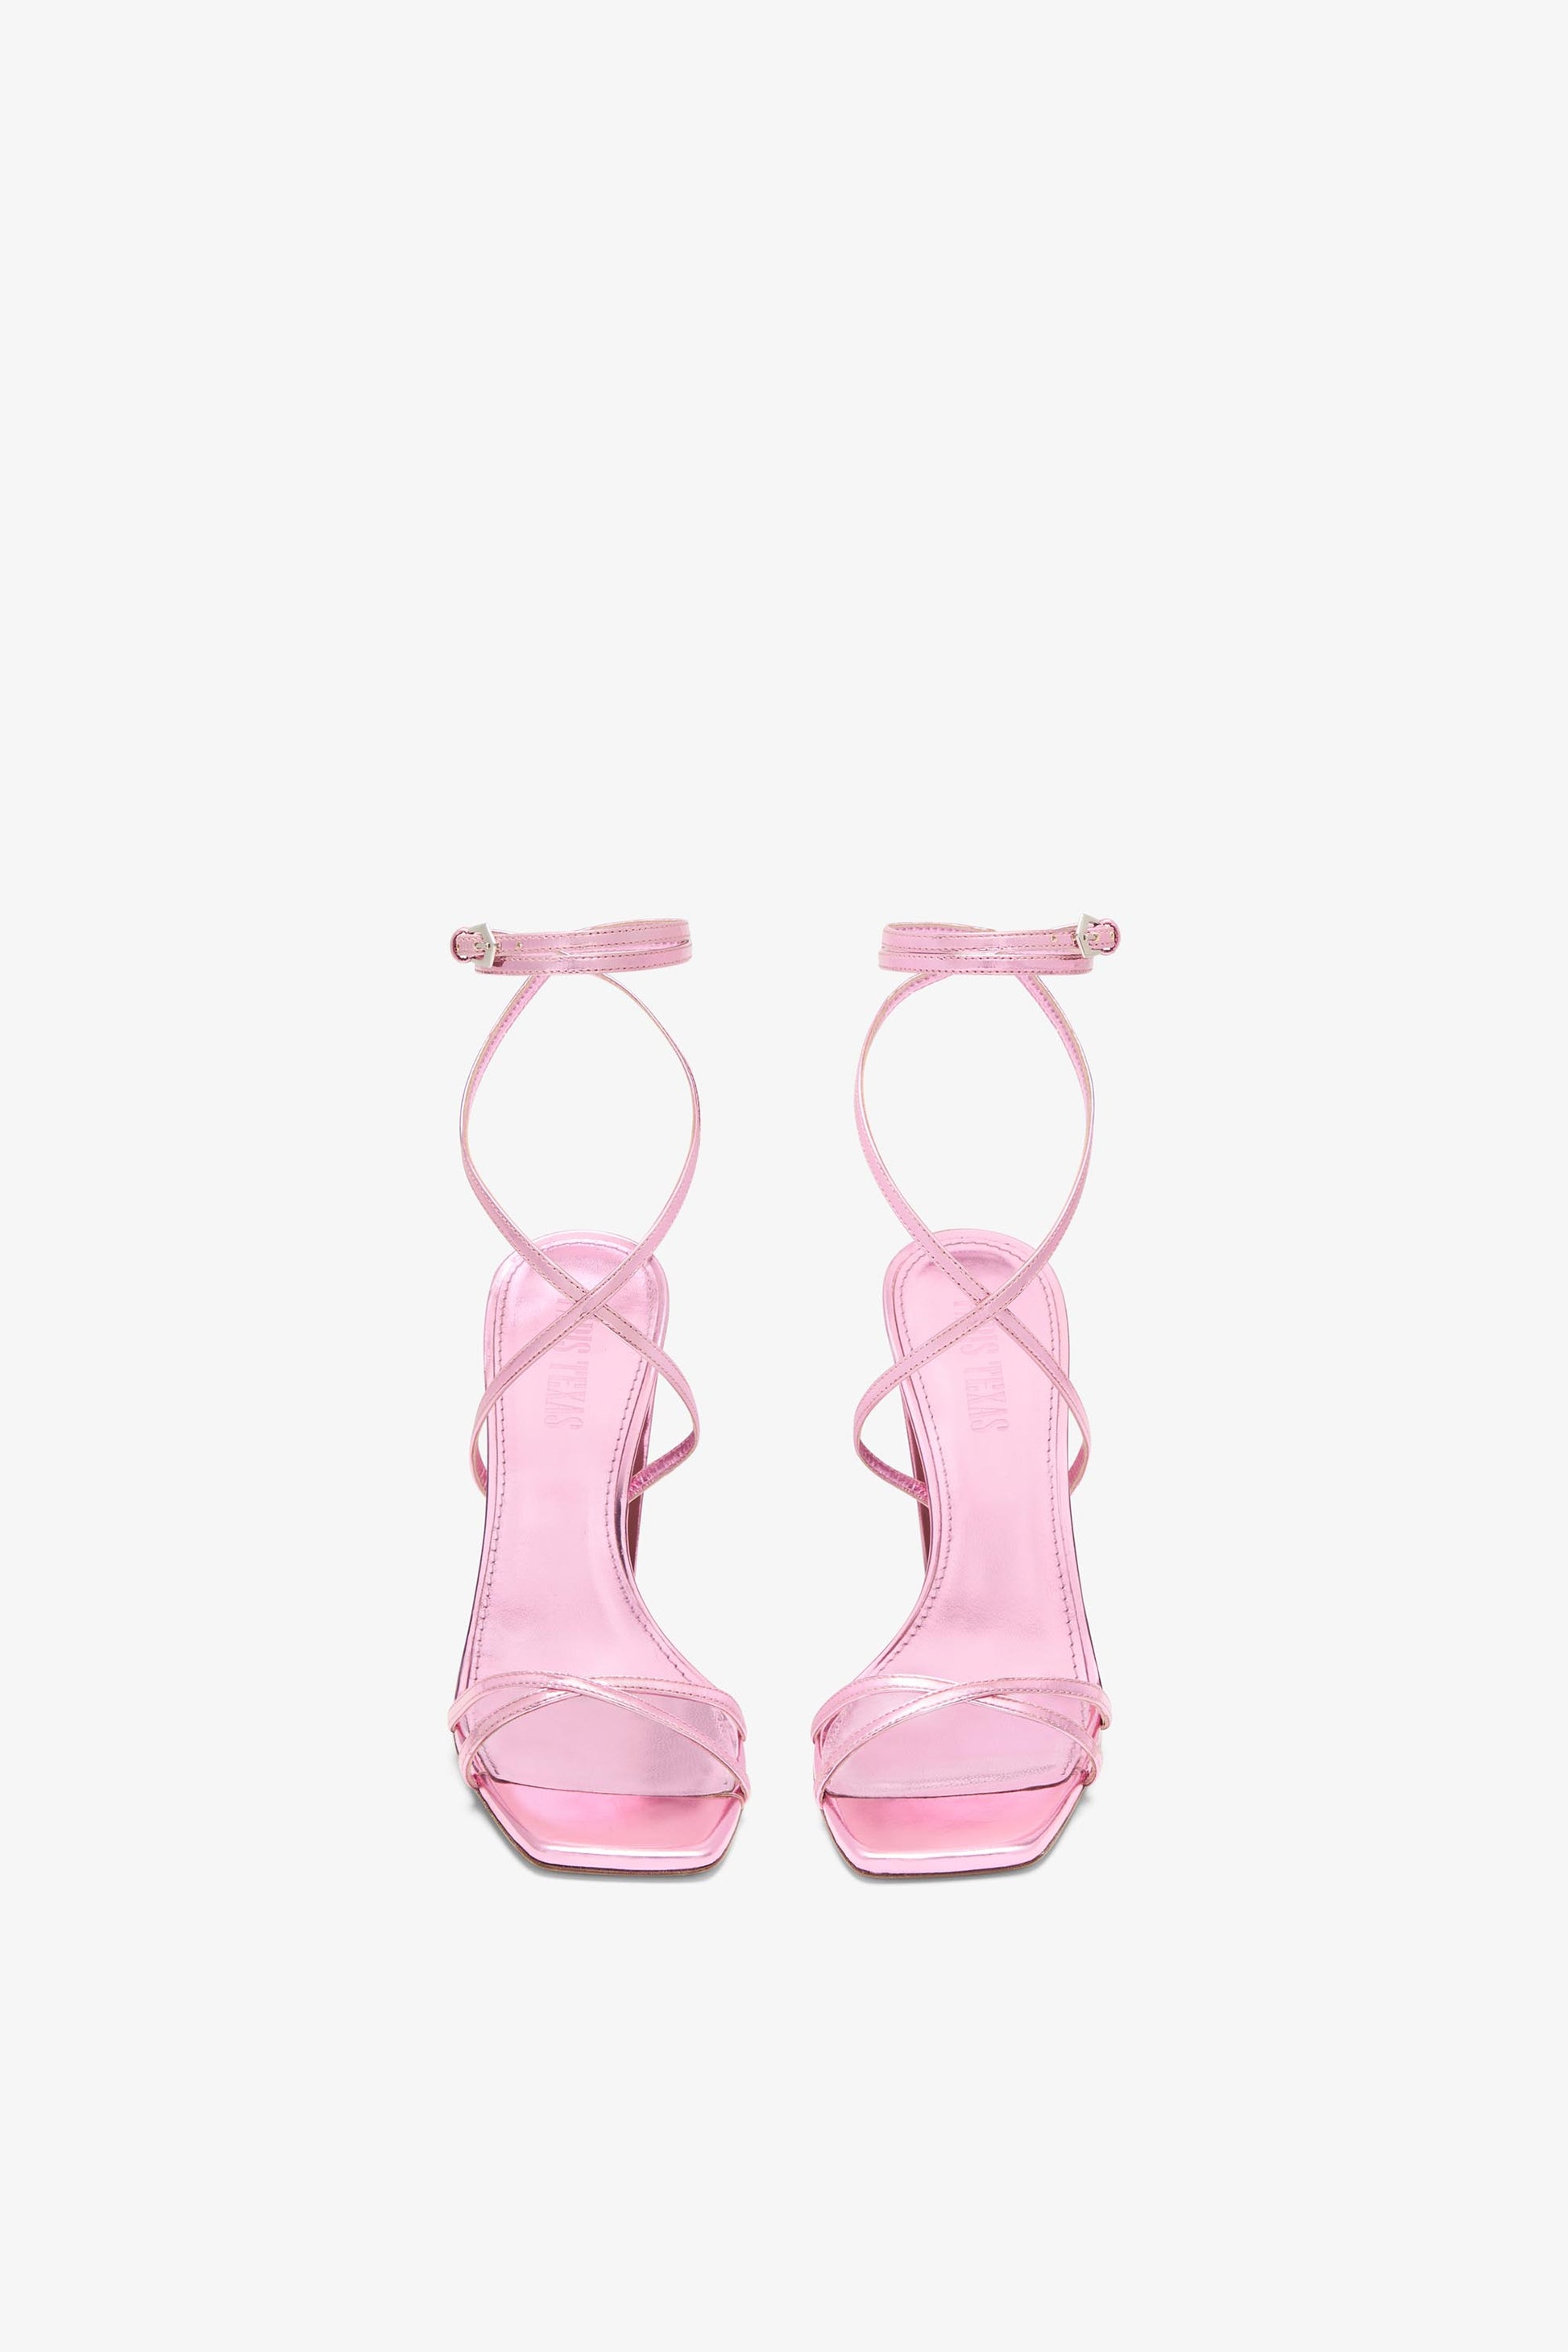 Pink mirrored leather sandal